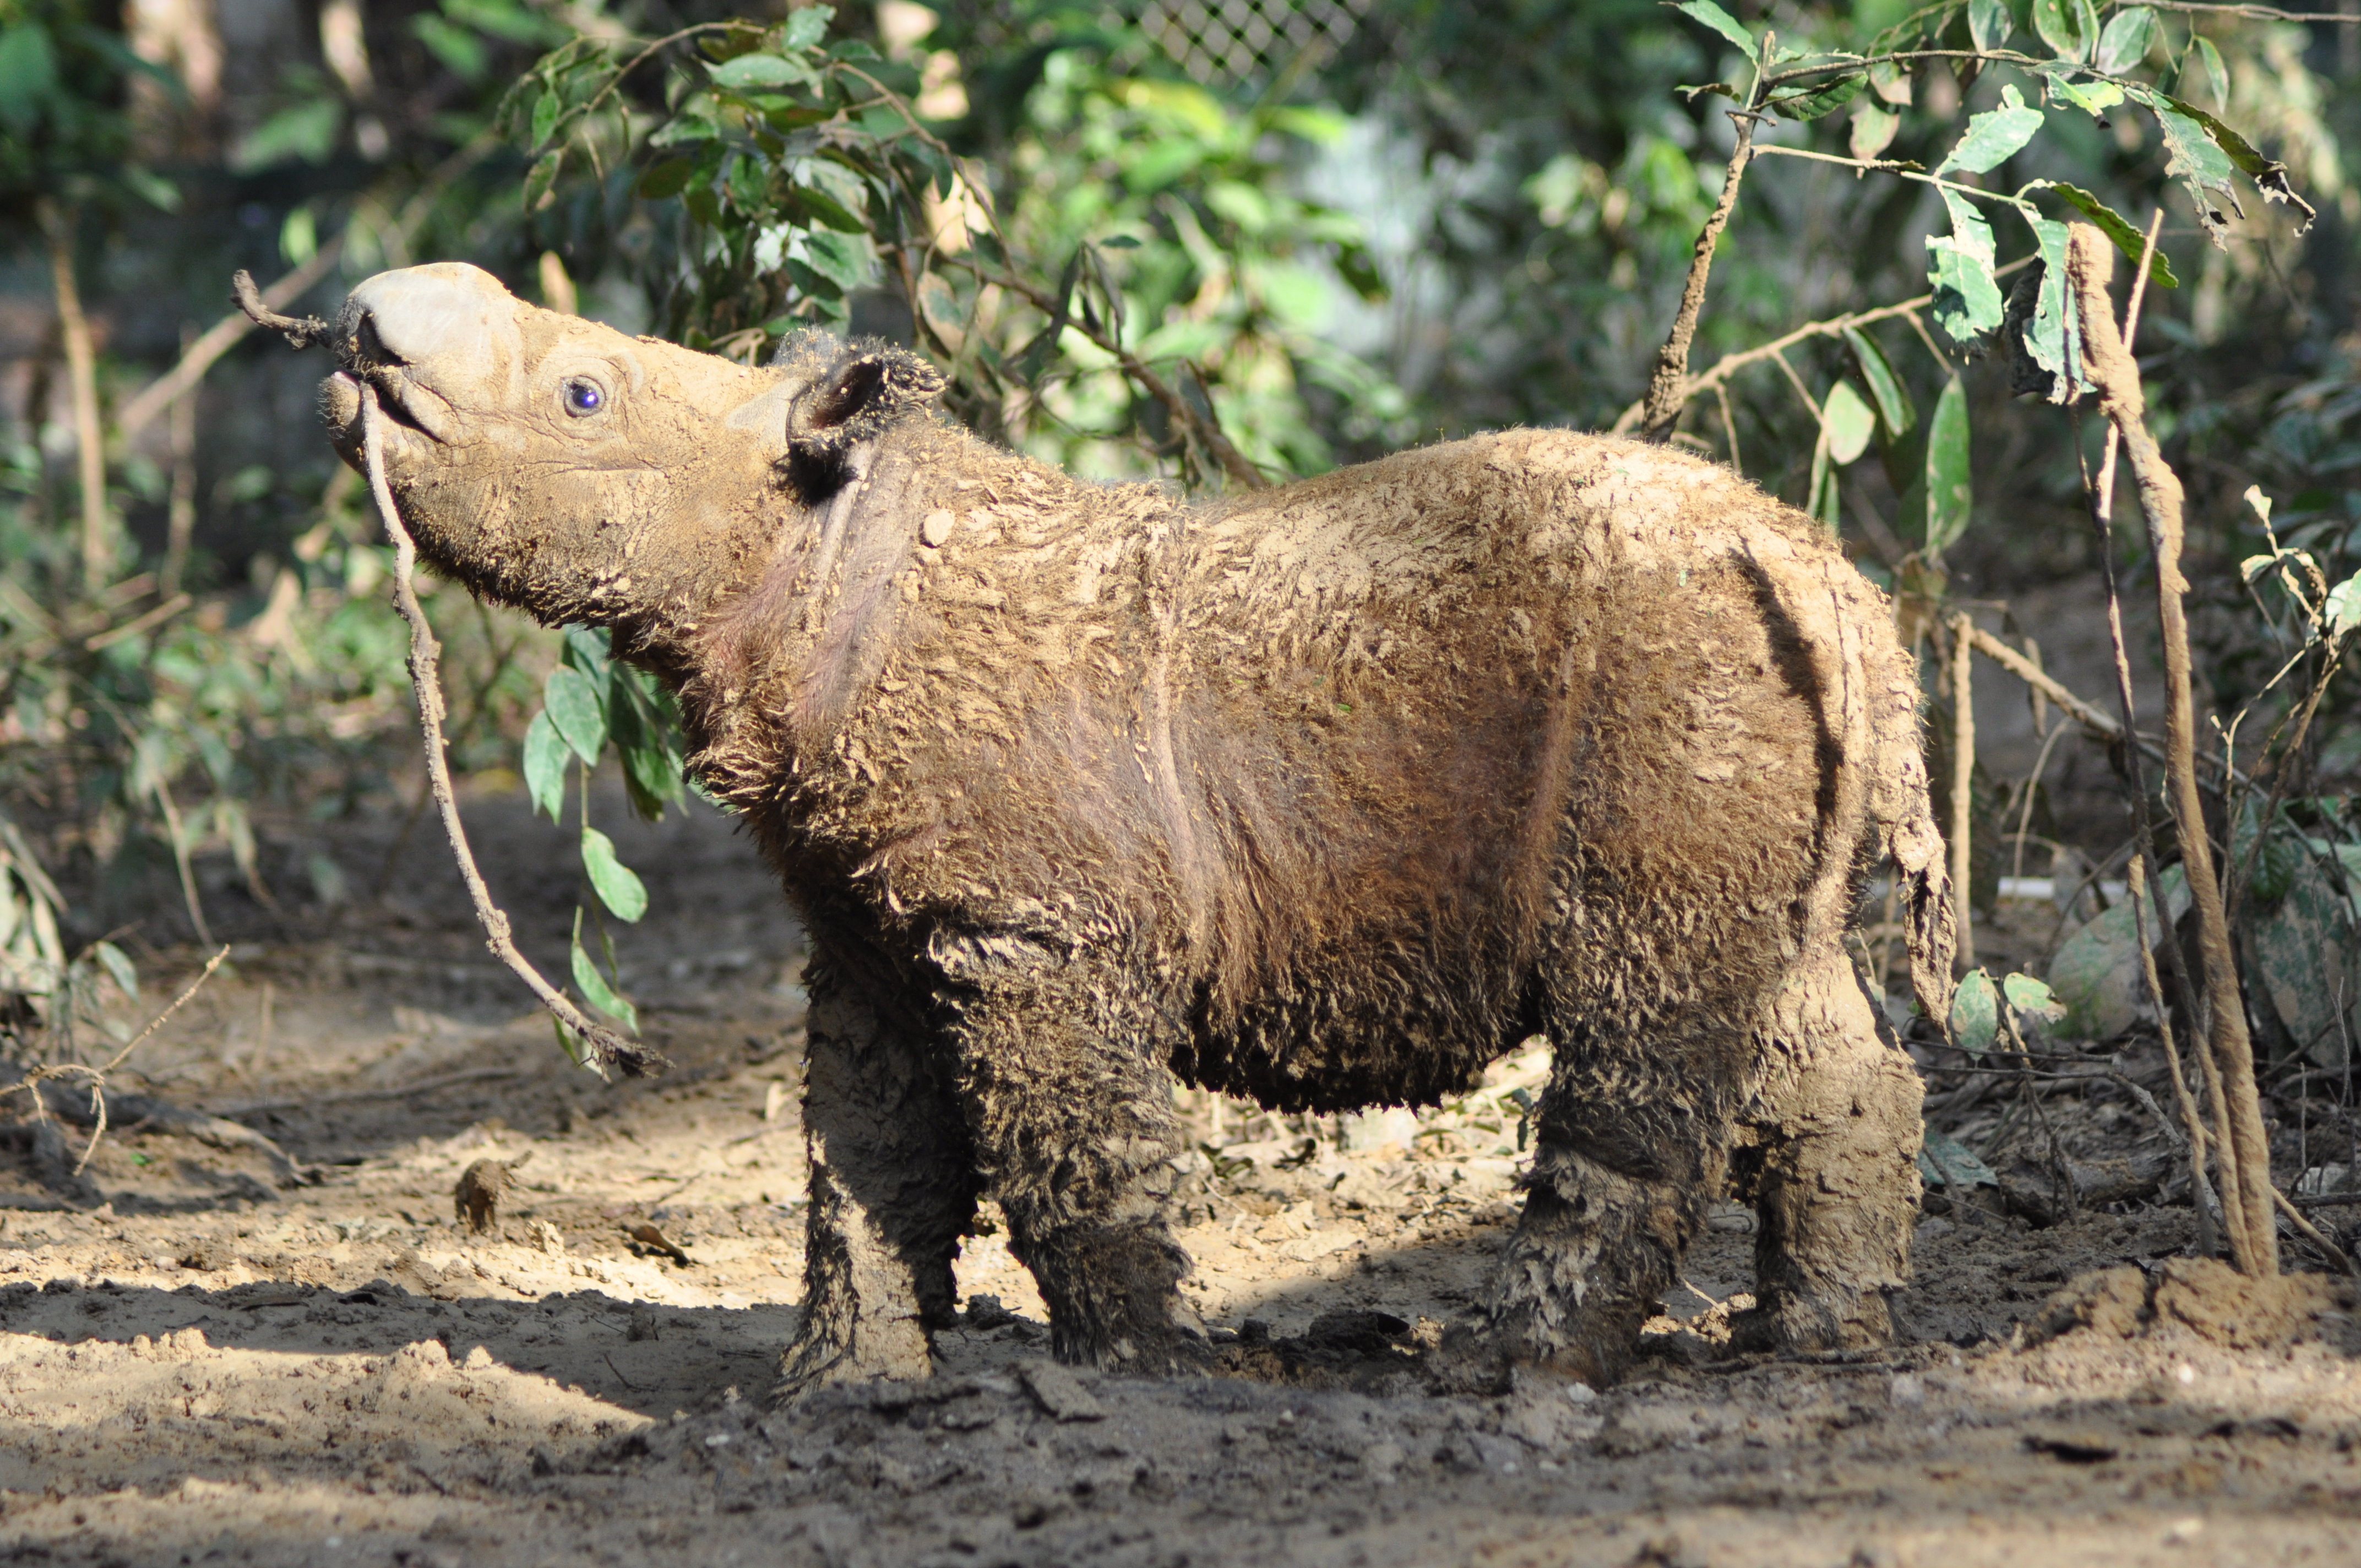 Pictured here is baby Sumatran rhino, Andatu, romping around in Indonesia’s Way Kambas National Park in 2012. Sumatran rhino calves weigh between 50 and 60 pounds at birth. Andatu will become a big brother in May, when Ratu’s second child joins the Sumatran rhino family at the Sumatran Rhino Sanctuary. Courtesy of Yayasan Badak Indonesia.